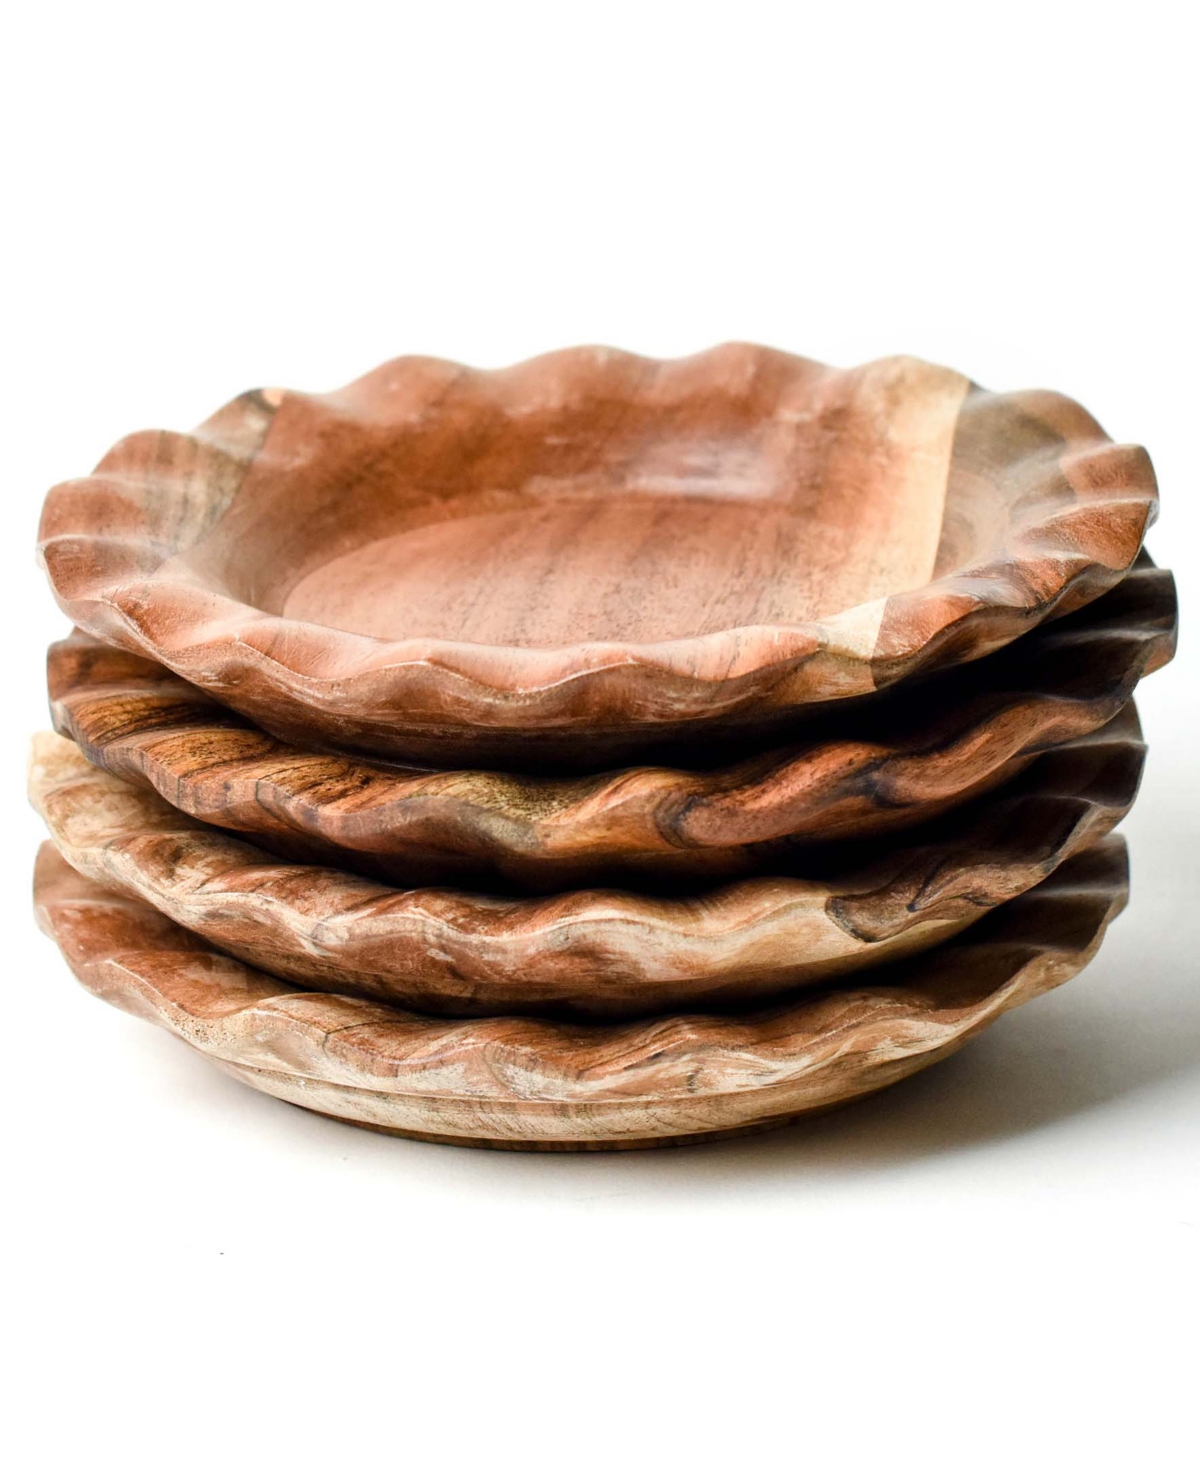 Fundamental Wood Ruffle 8" Salad Plate Set of 4, Service for 4 - Brown